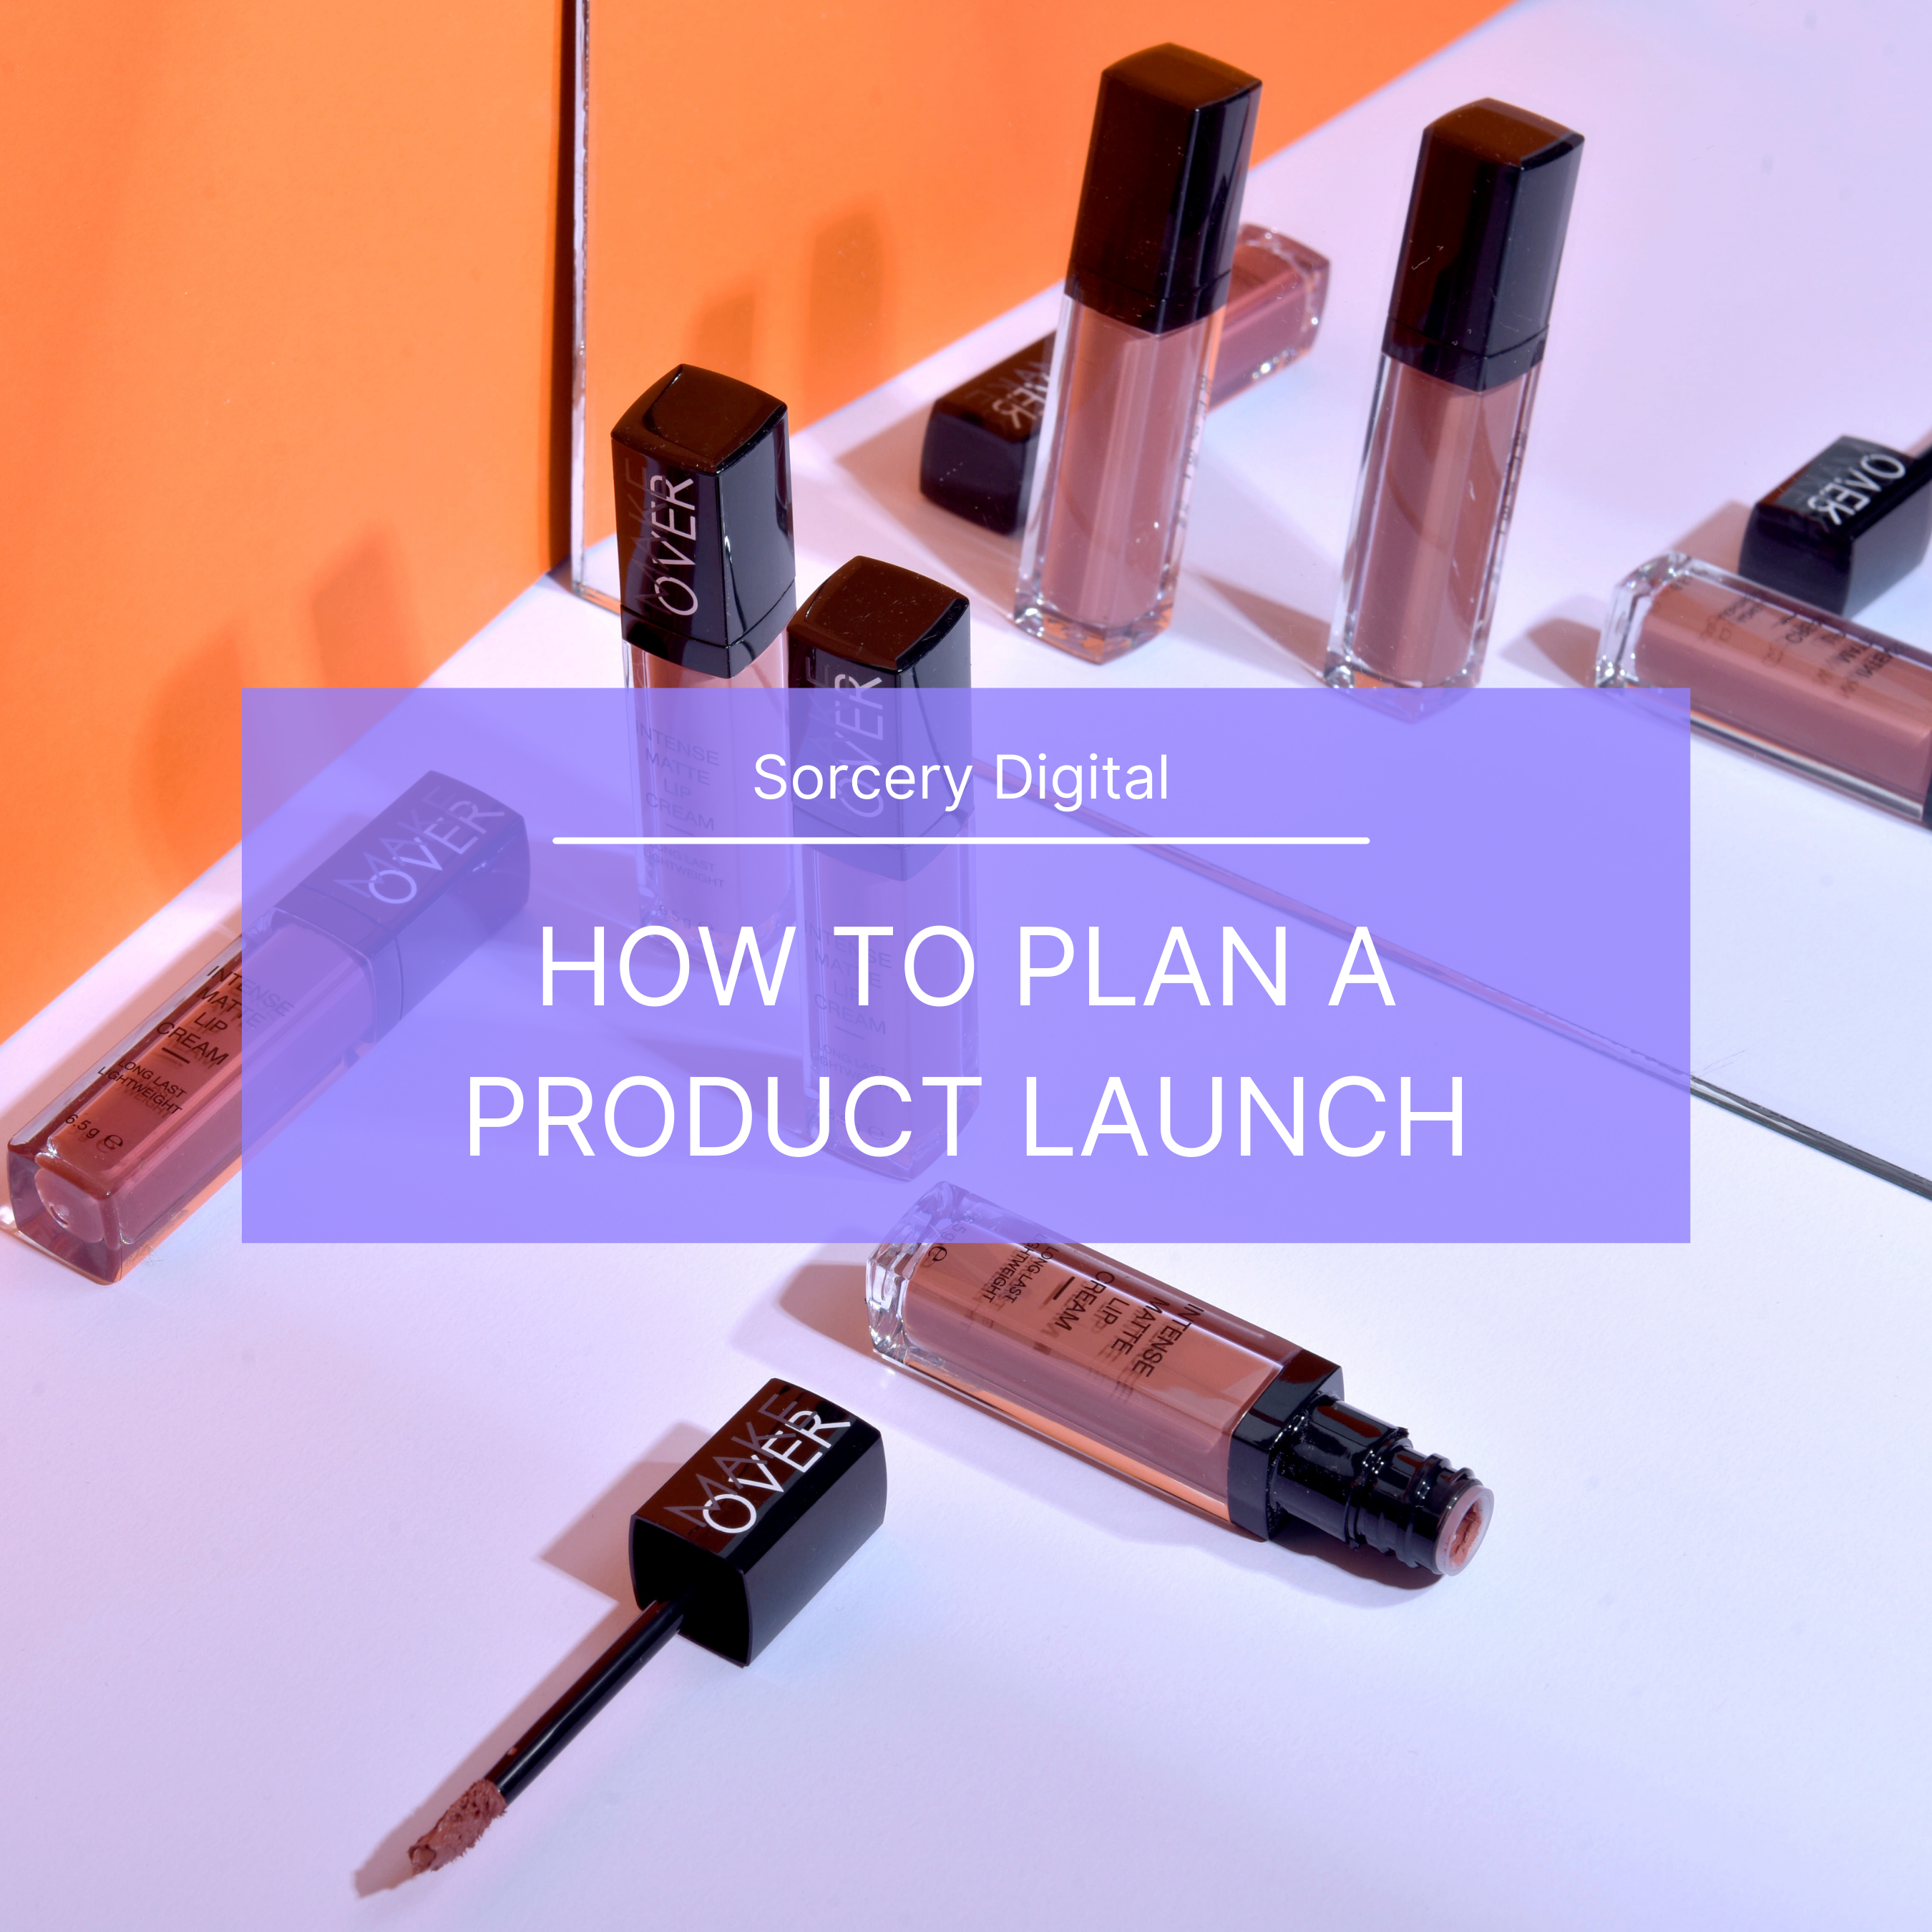 How To Plan A Product Launch